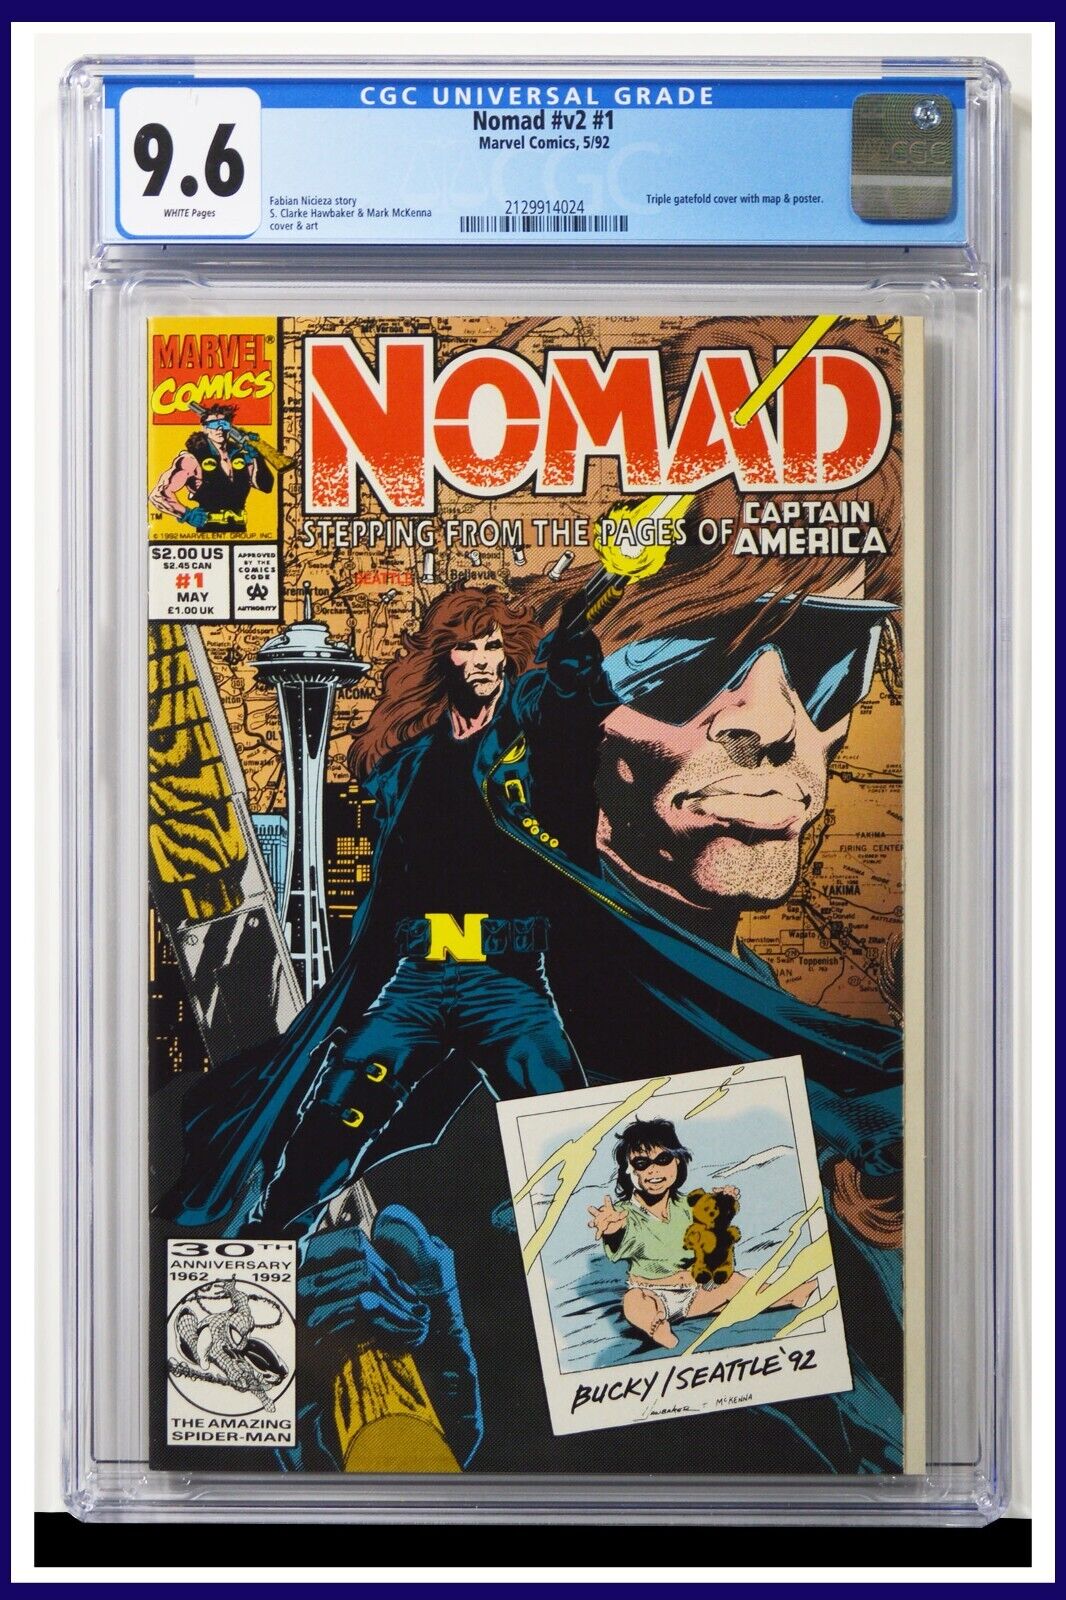 Nomad #v2 #1 CGC Graded 9.6 Marvel May 1992 White Pages Comic Book.